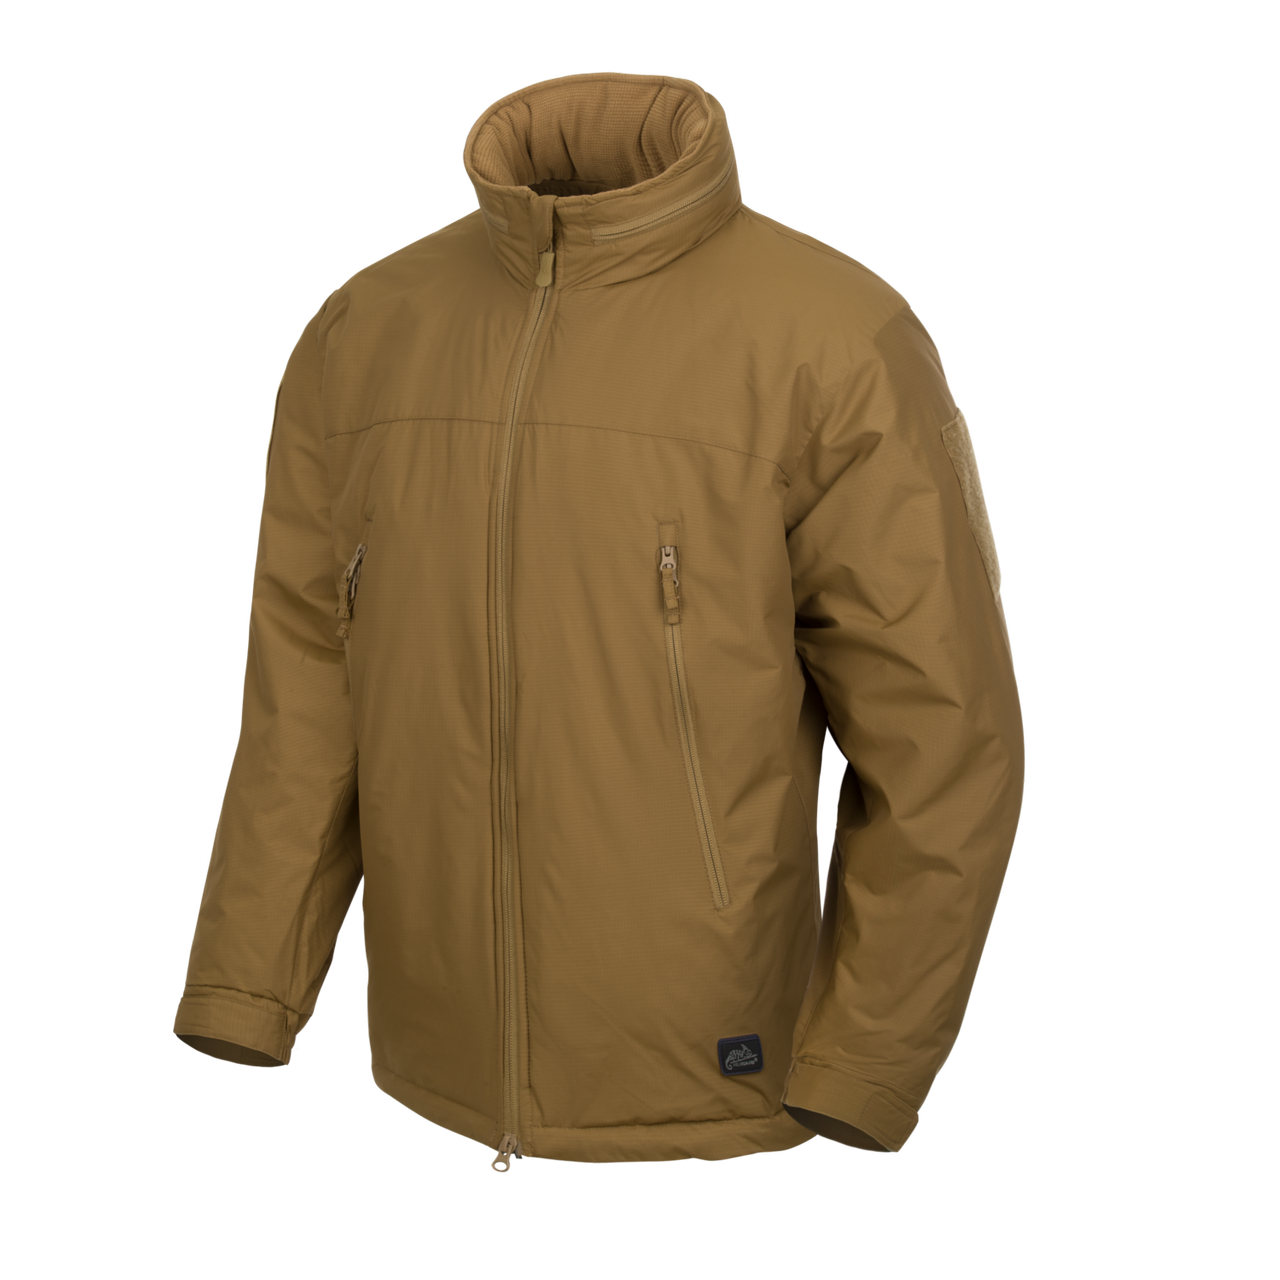 Green Blizzard 3 Layer Survival Jacket - Israeli First Aid